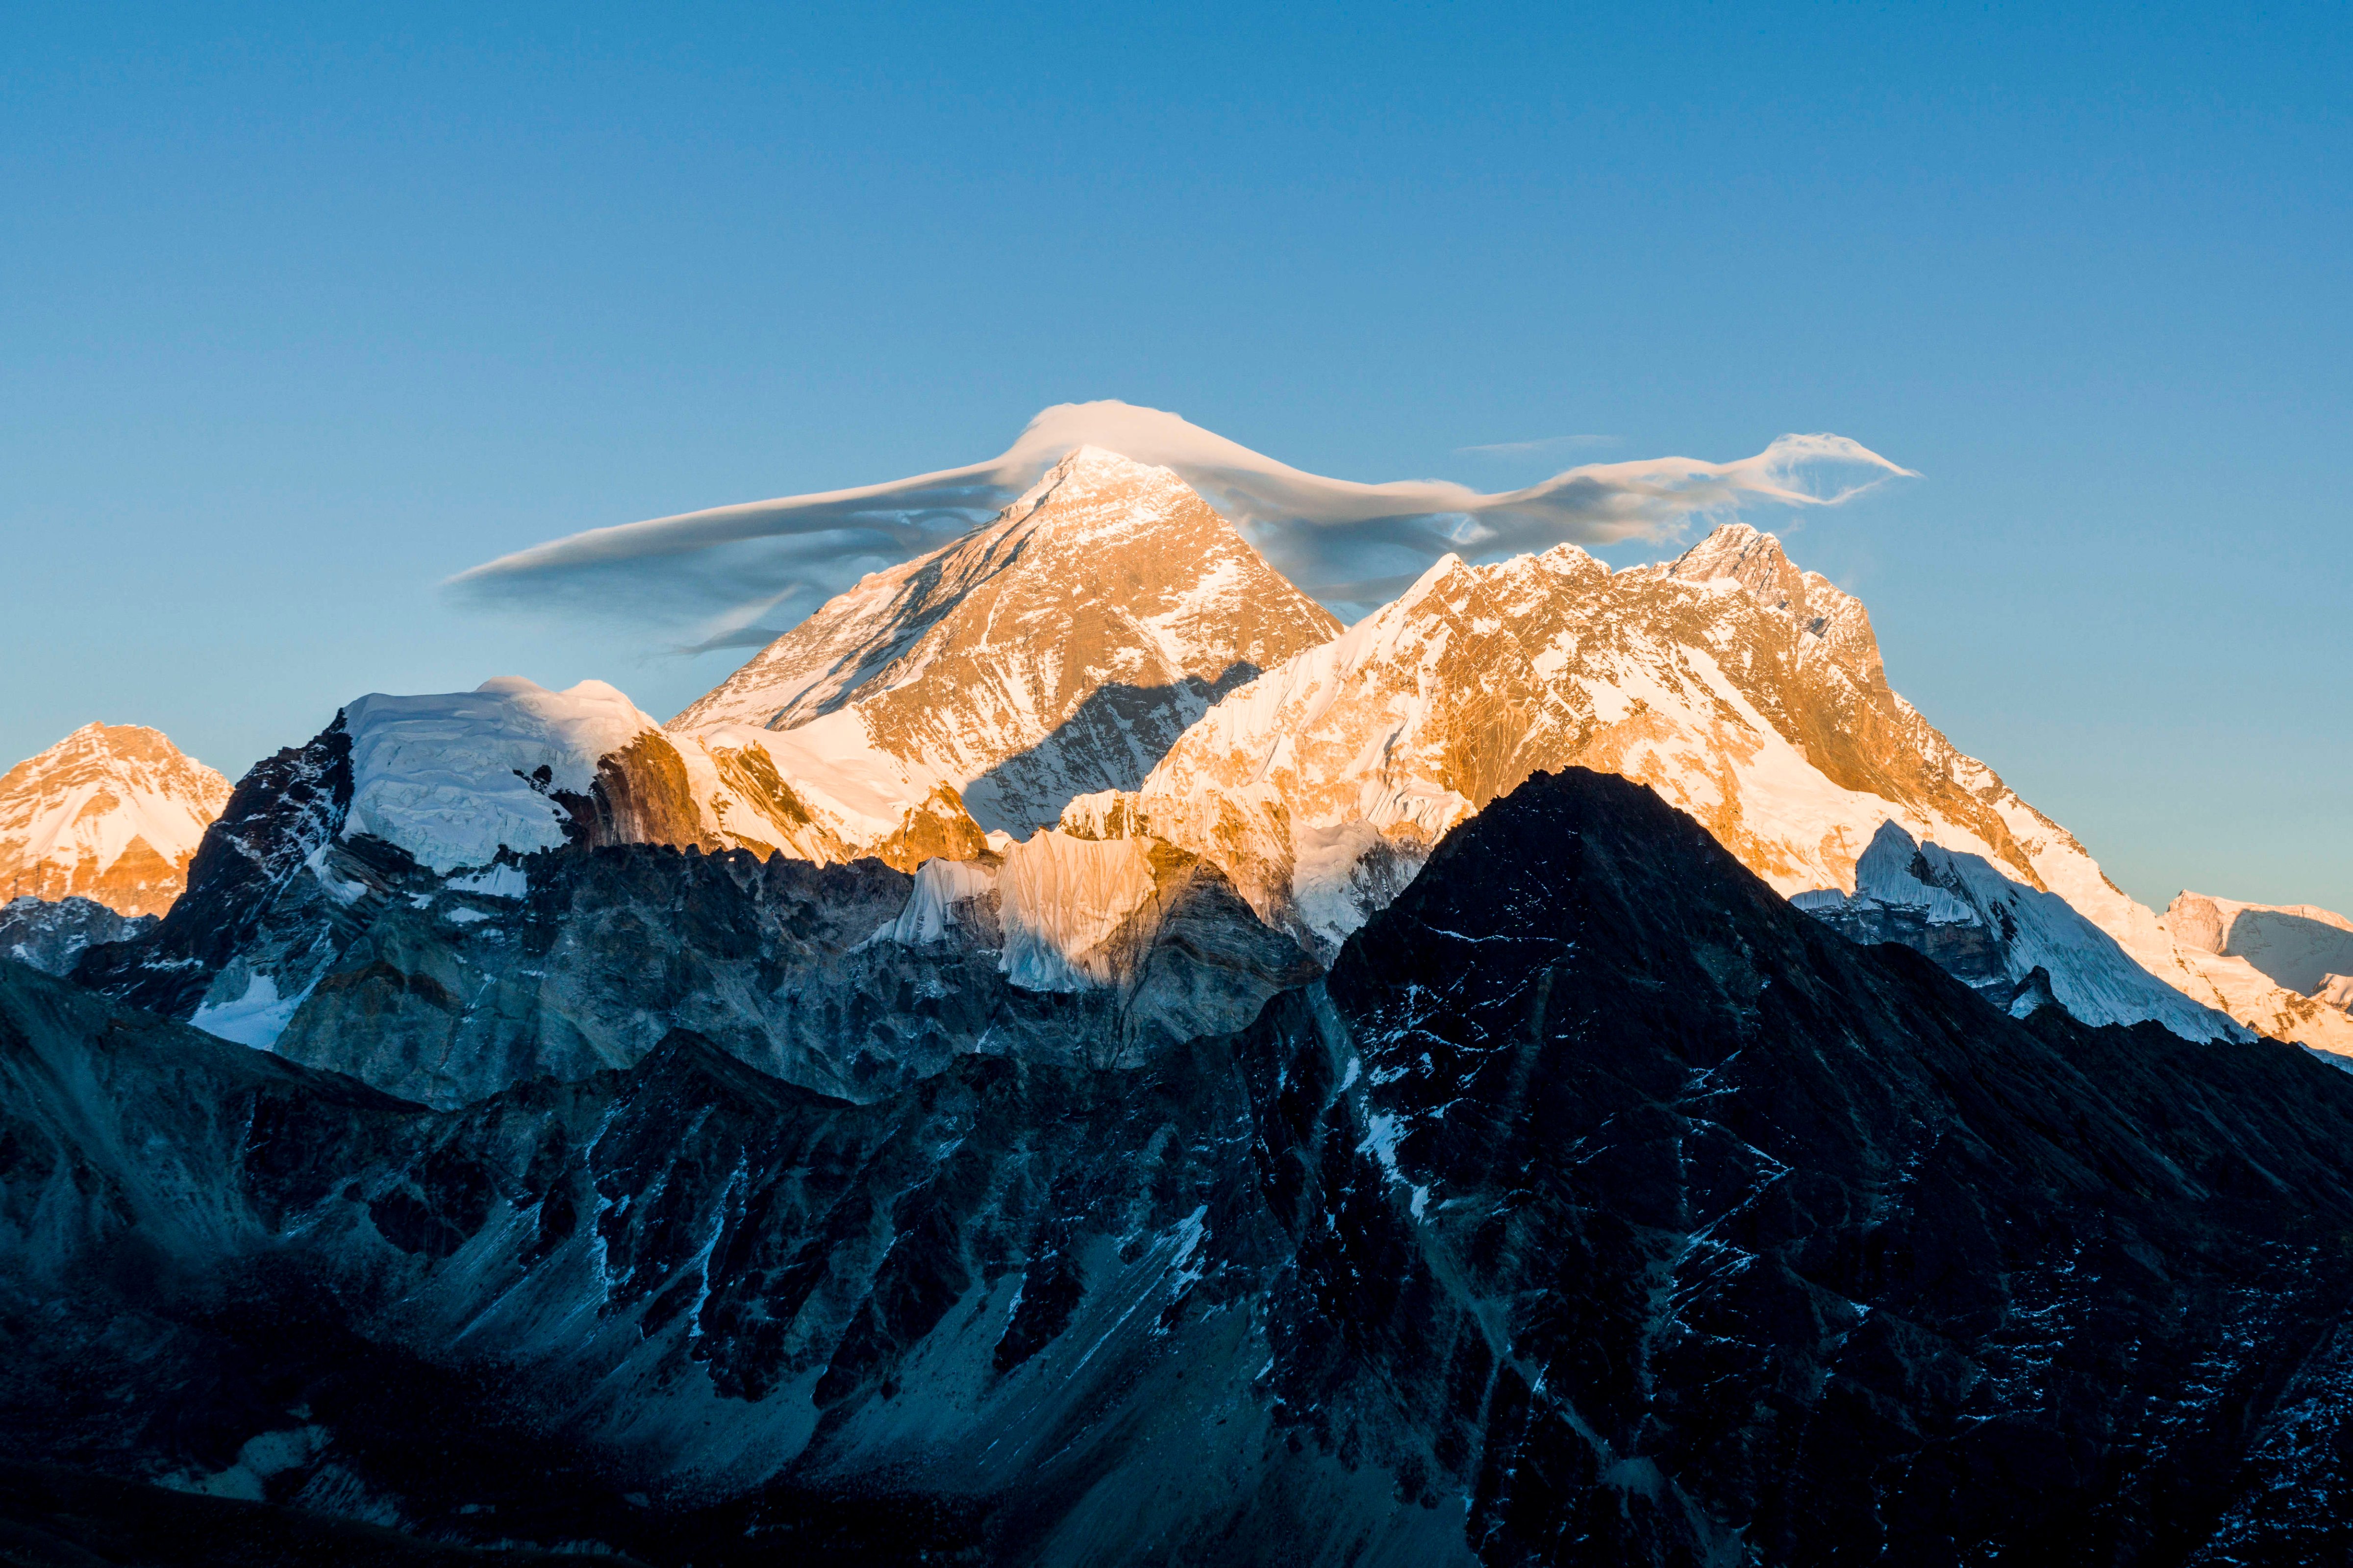 Mt. Everest with a white cloud on top, is seen from Gokyo Ri  at sunset. (Frank Bienewald—LightRocket/Getty Images)